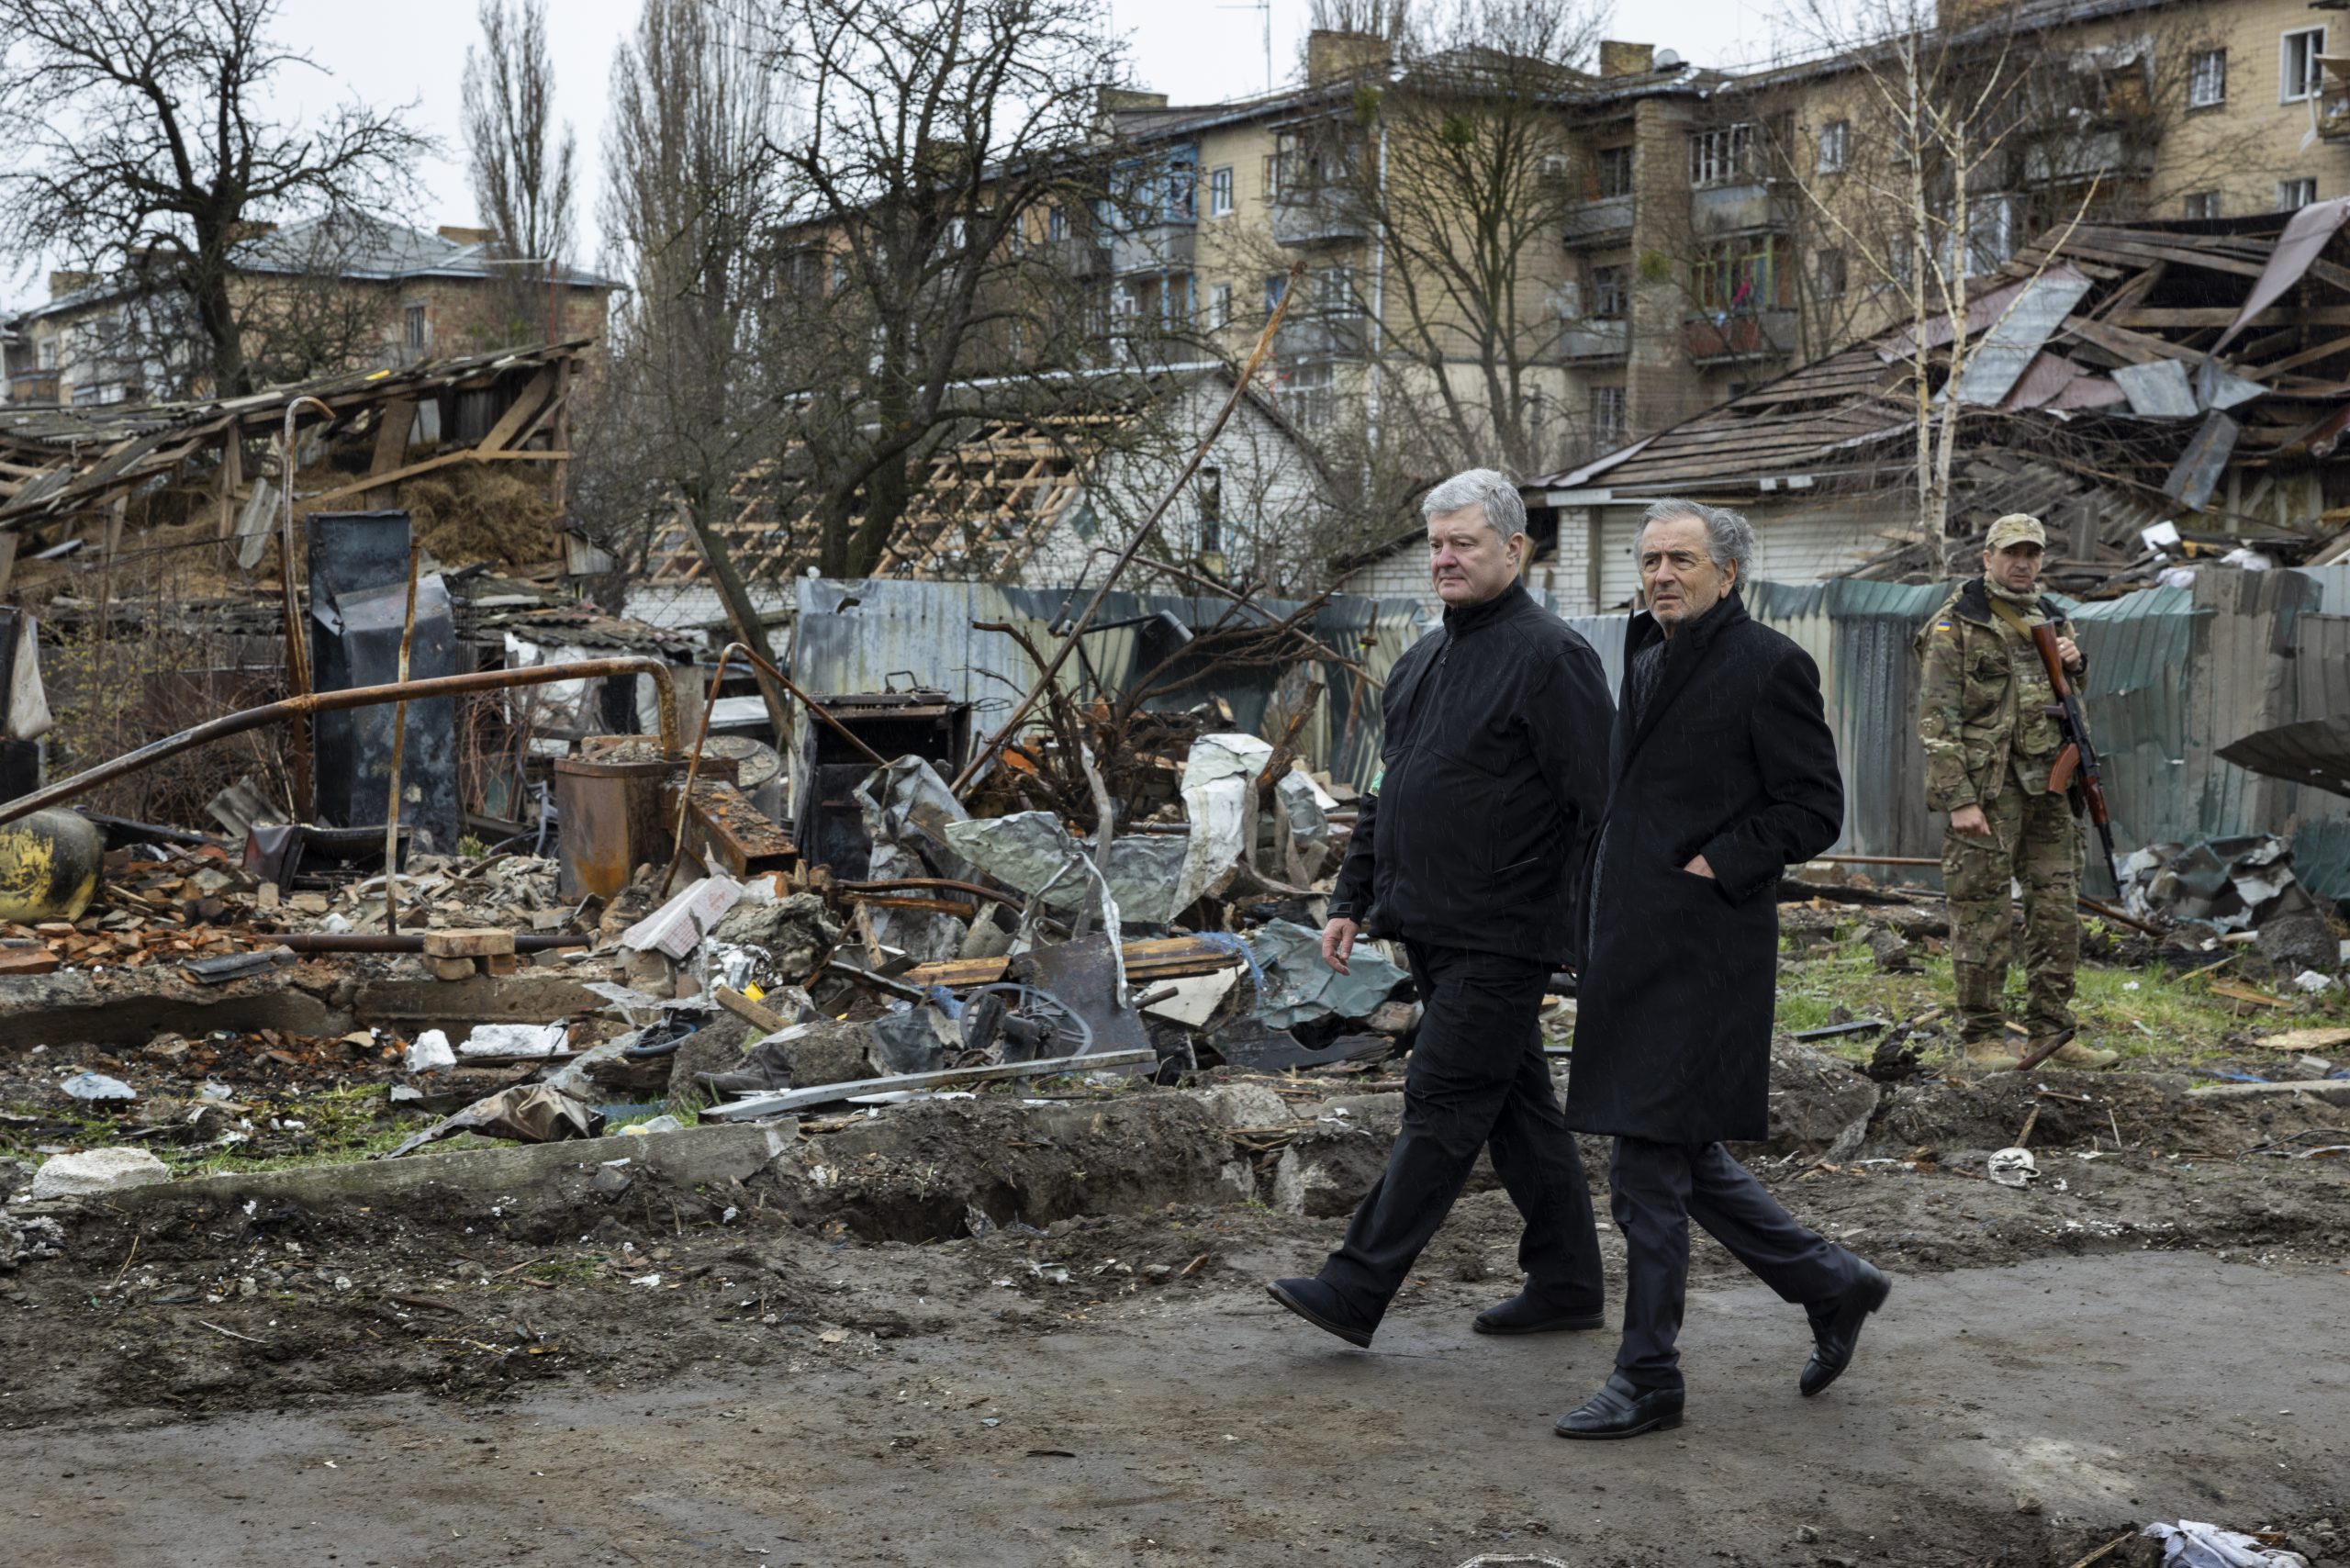 In Butcha with Petro Poroshenko. The town was wiped out by the Russian army in its retreat.